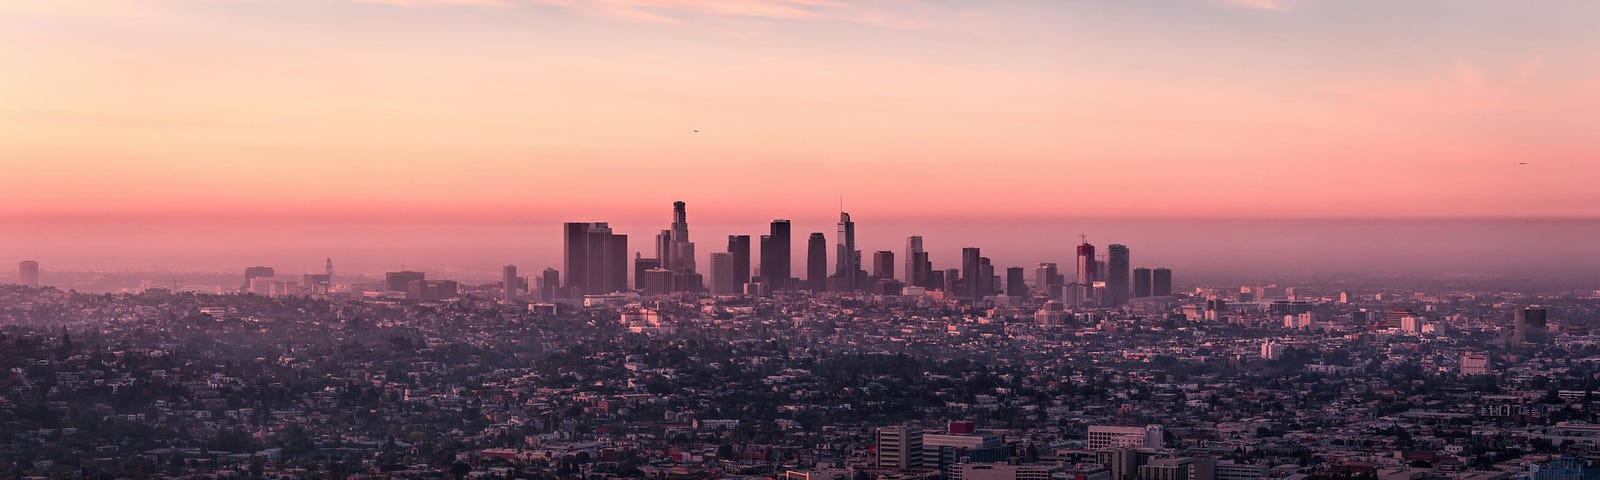 The Los Angeles city skyline at sunset.